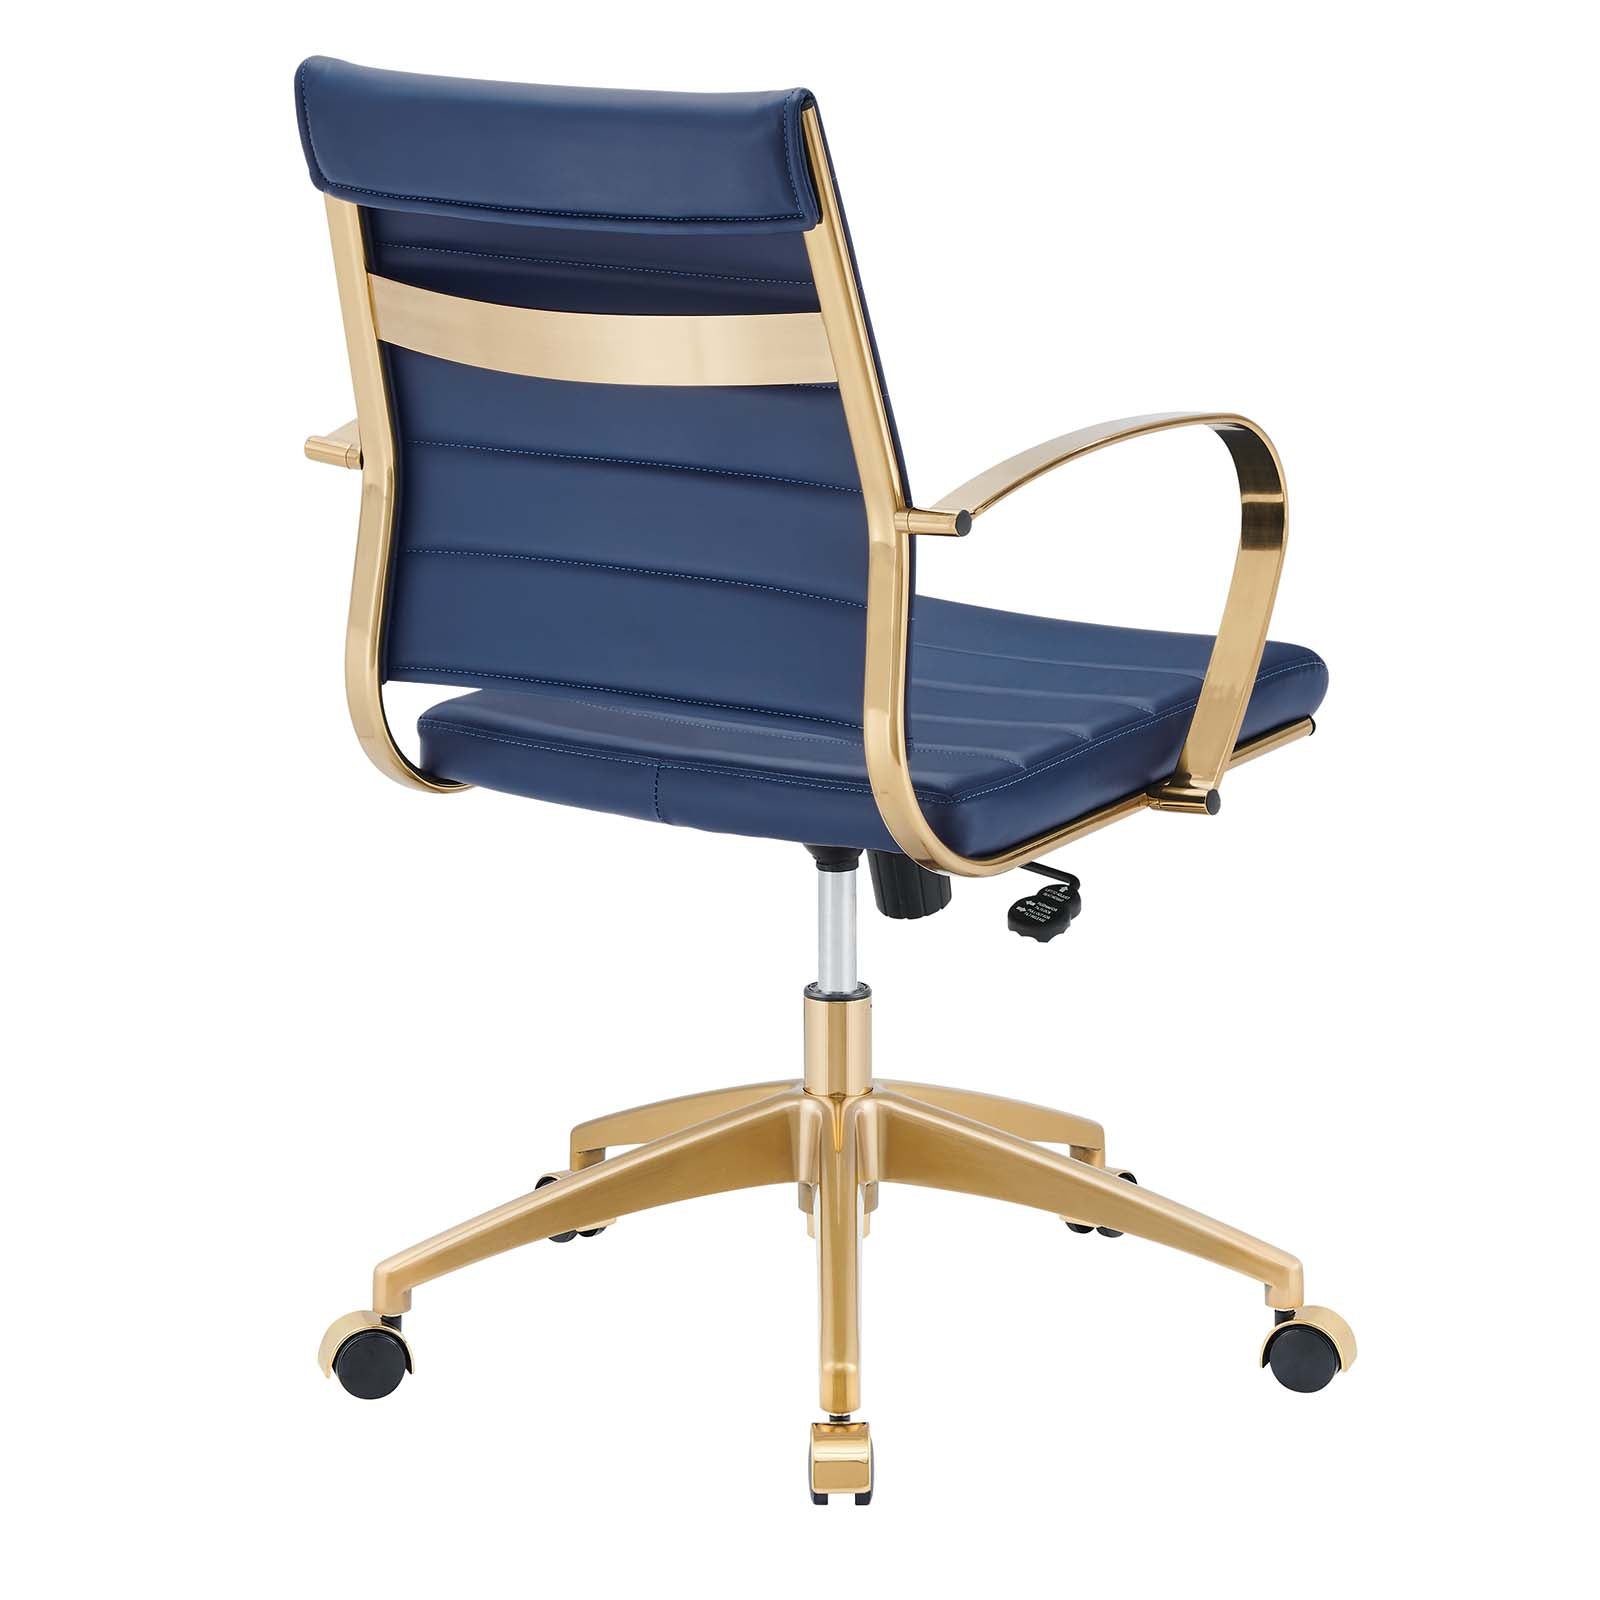 Jive Gold Stainless Steel Midback Office Chair - East Shore Modern Home Furnishings